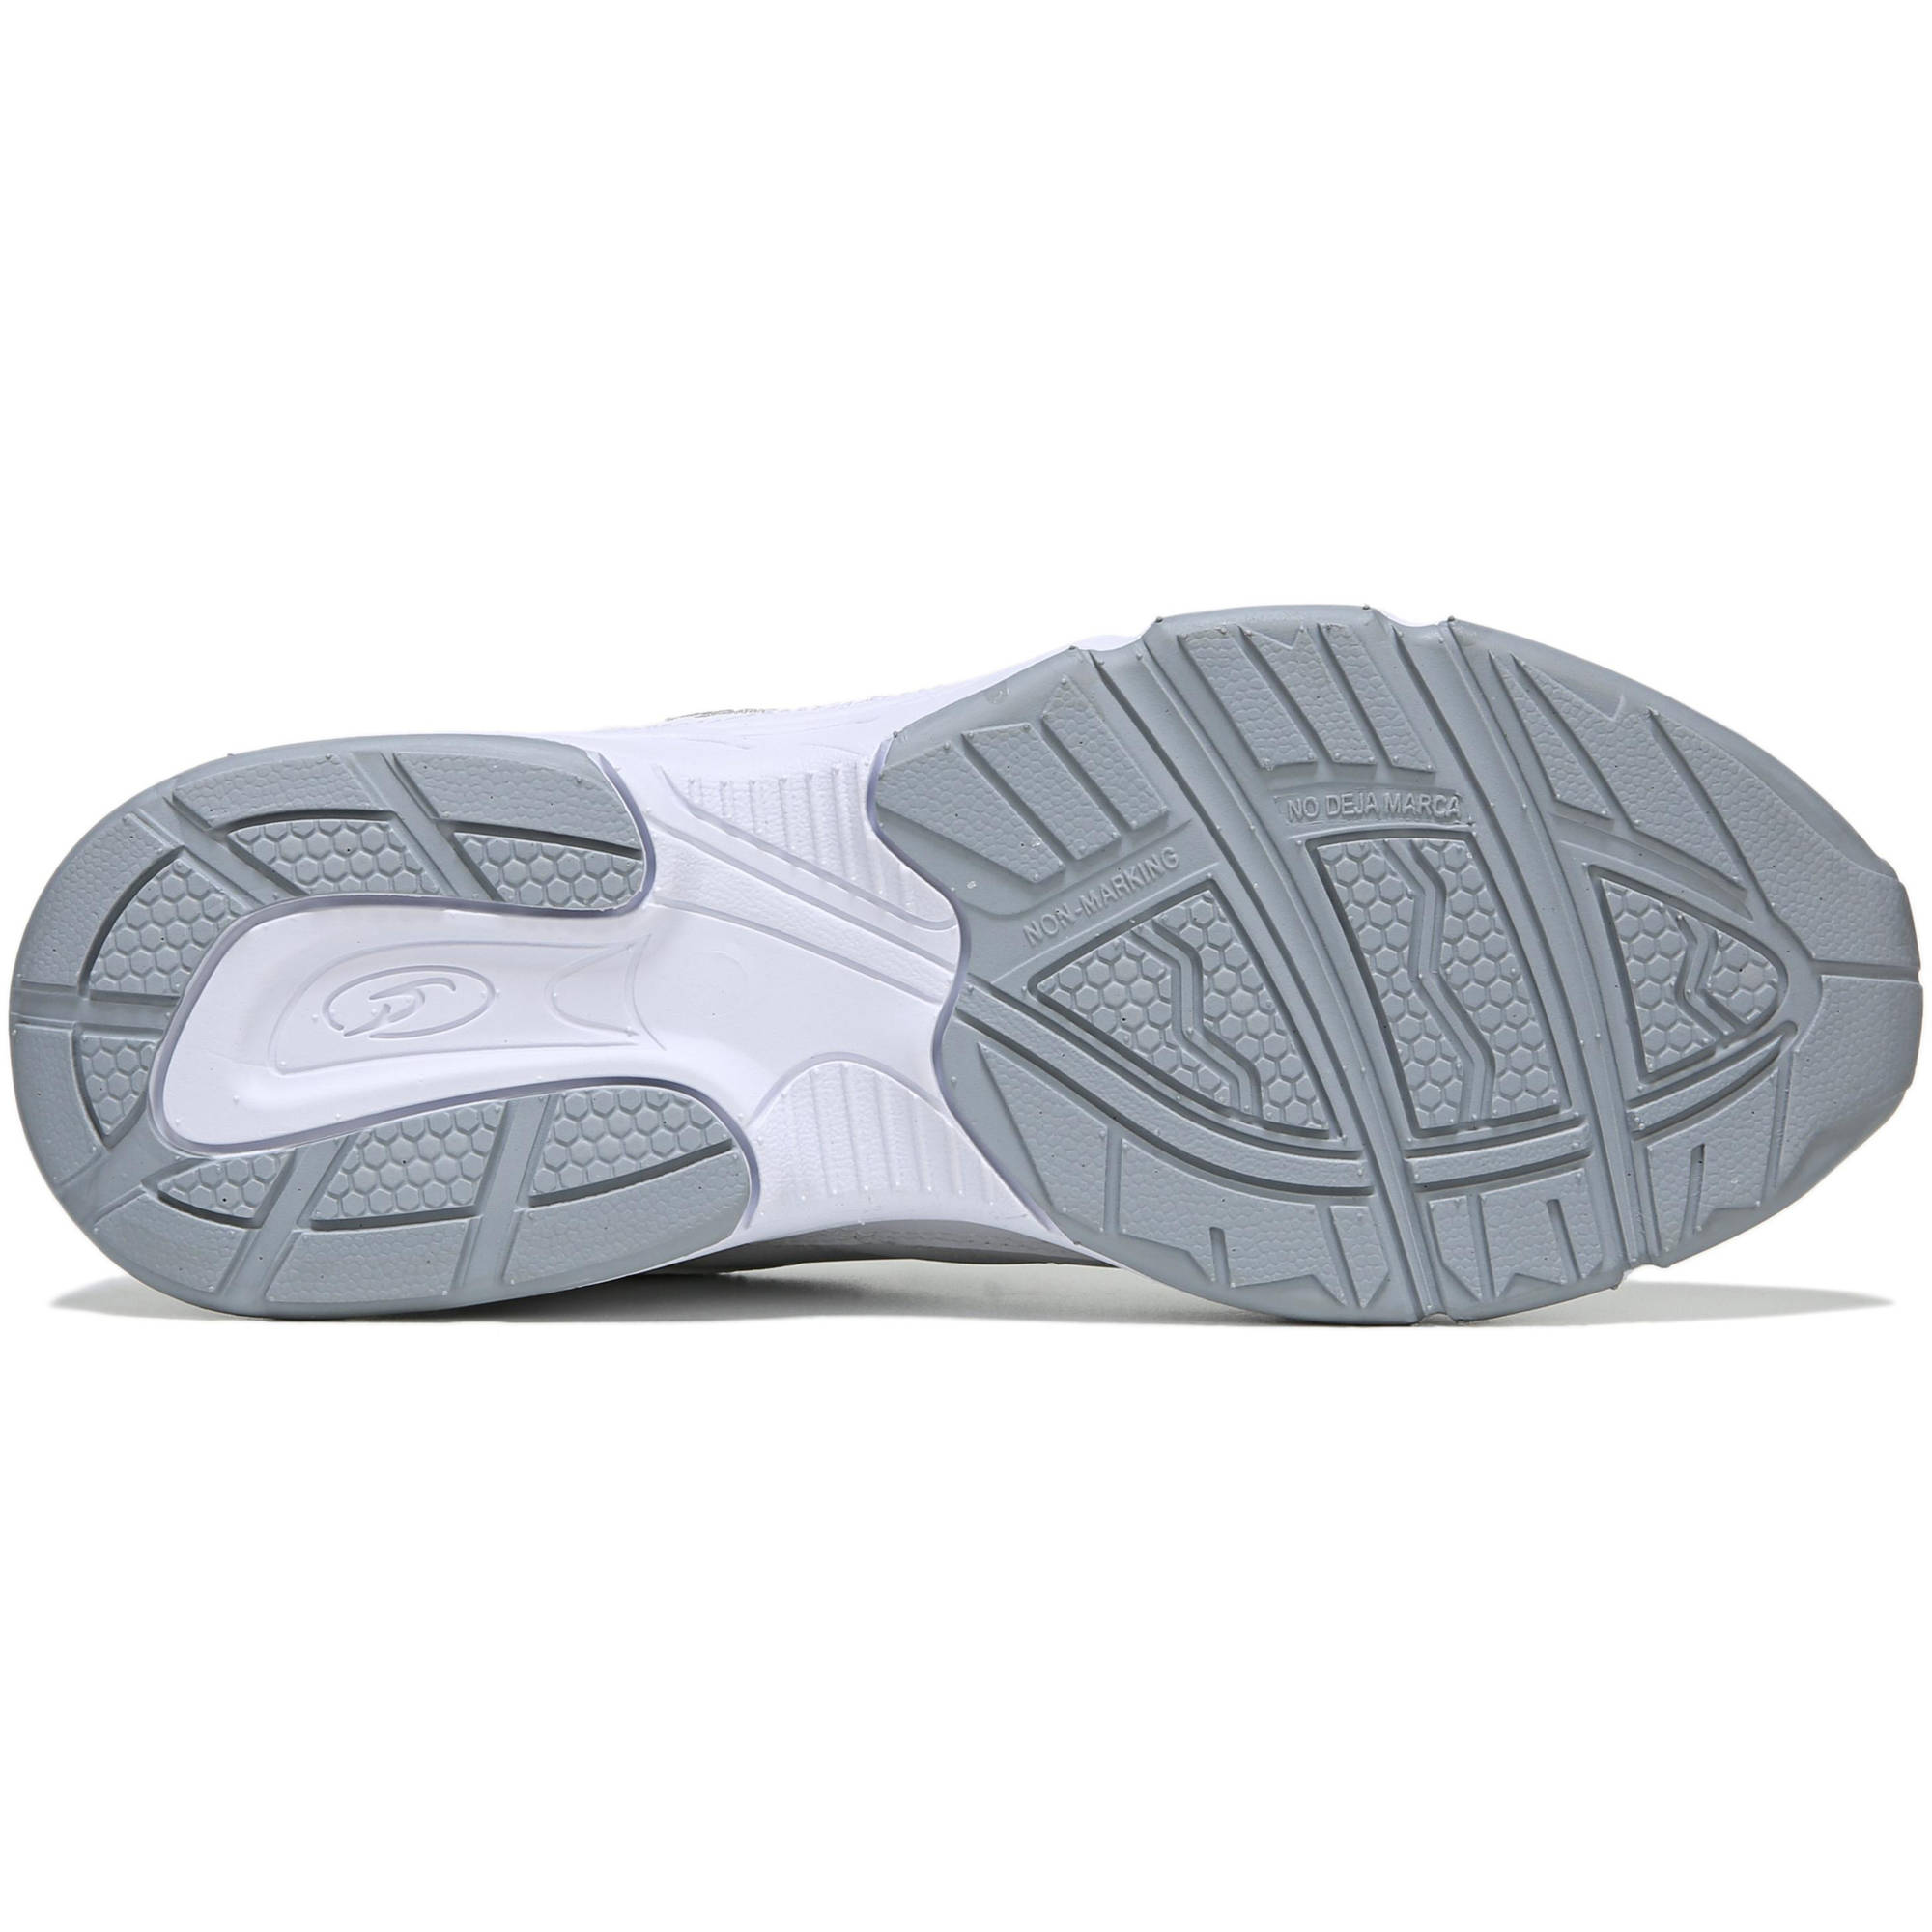 Dr. Scholl's Men's Brisk Sneakers (Wide Width Available) - image 2 of 5